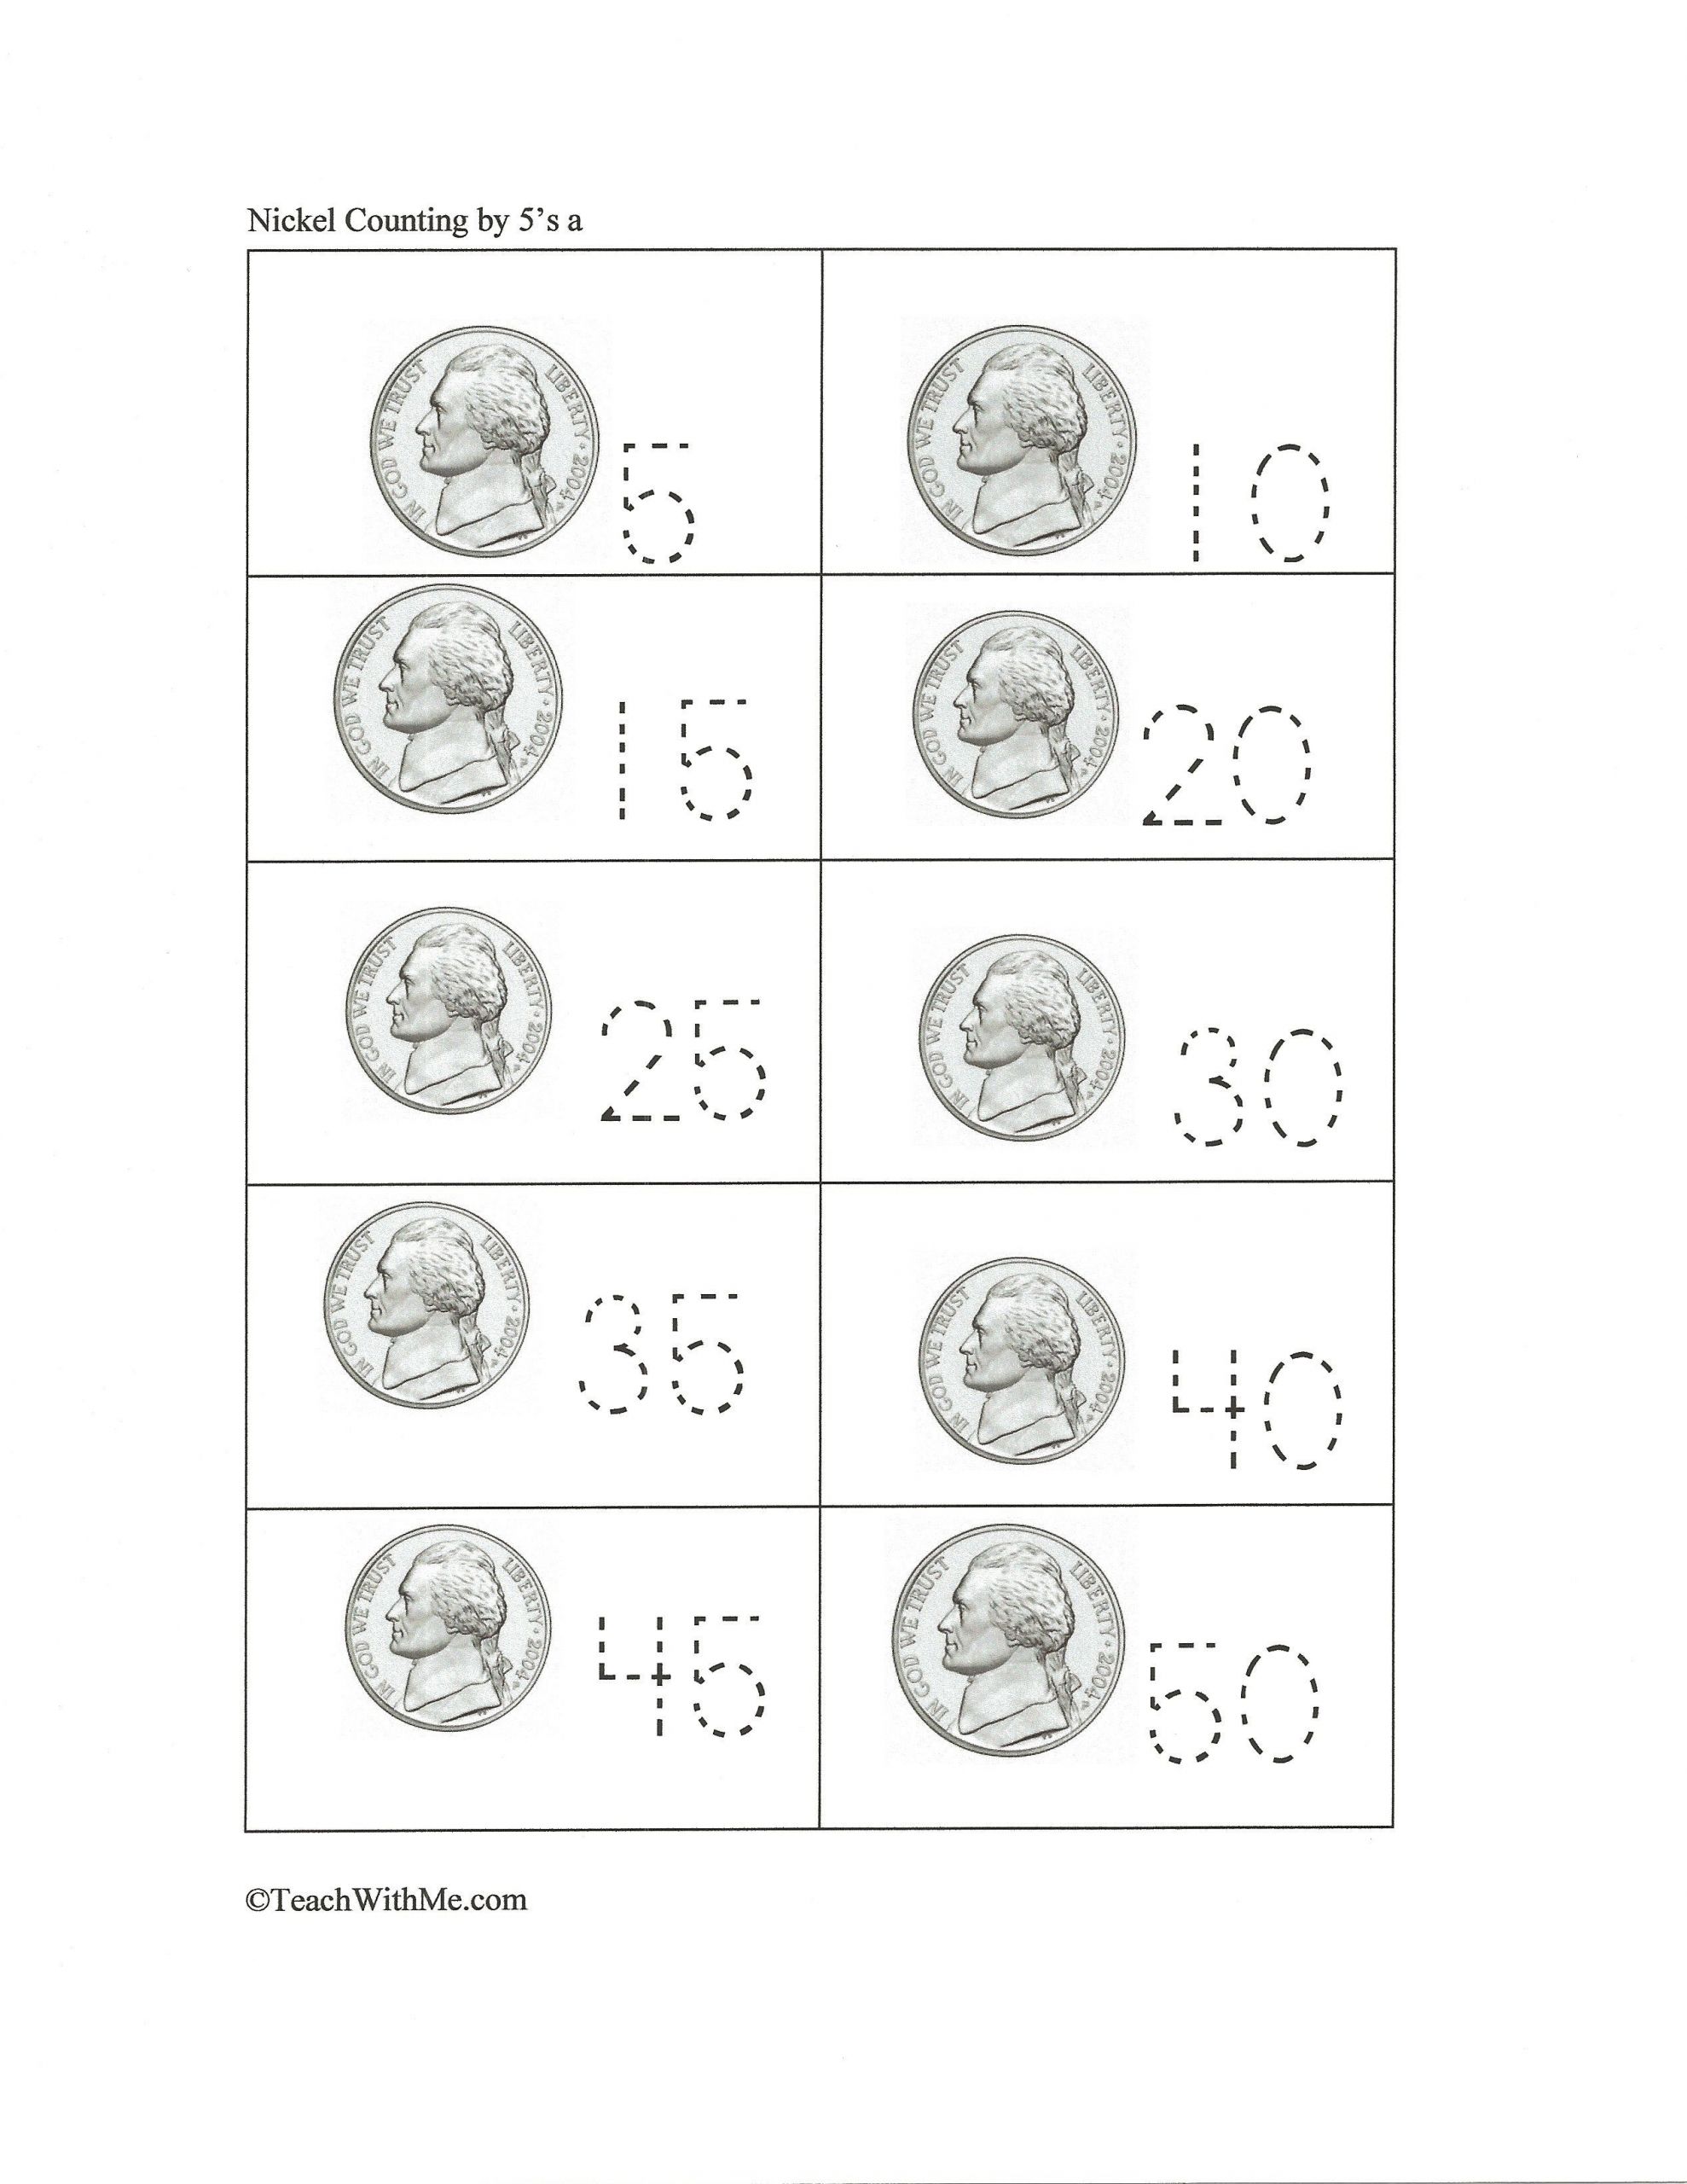 Free Math Worksheets Second Grade 2 Addition Add 4 Single Digits Missing Number